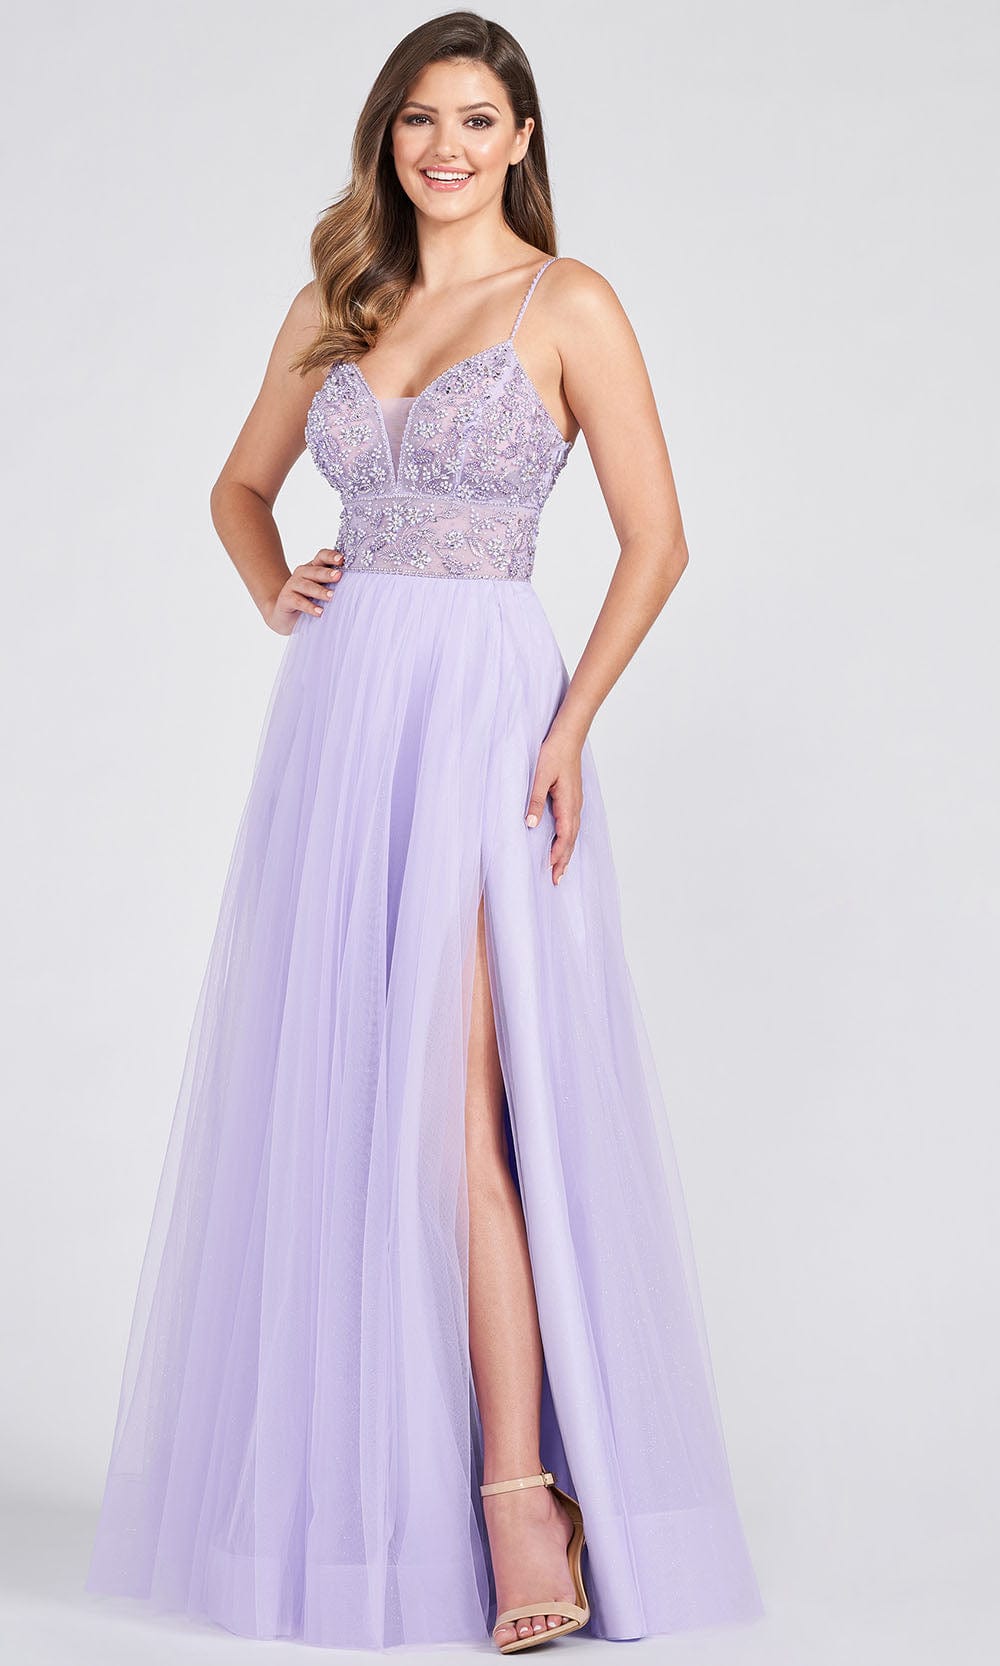 Enchanted Prom Gown Lace with Front Slit 740967TIR-Lavender